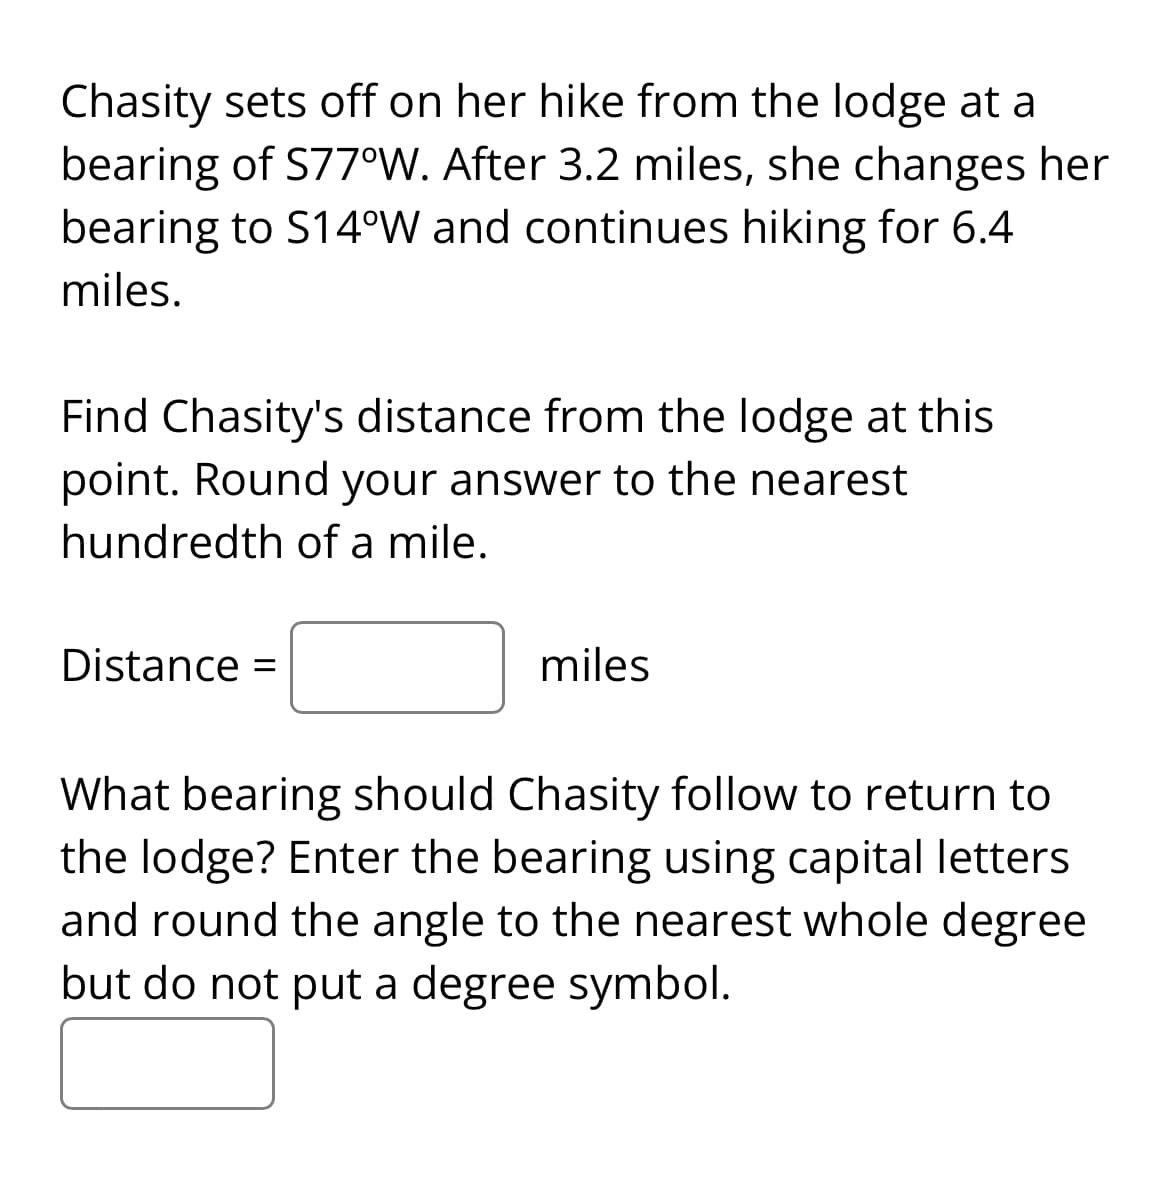 Chasity sets off on her hike from the lodge at a
bearing of S77°W. After 3.2 miles, she changes her
bearing to S14°W and continues hiking for 6.4
miles.
Find Chasity's distance from the lodge at this
point. Round your answer to the nearest
hundredth of a mile.
Distance =
miles
What bearing should Chasity follow to return to
the lodge? Enter the bearing using capital letters
and round the angle to the nearest whole degree
but do not put a degree symbol.
